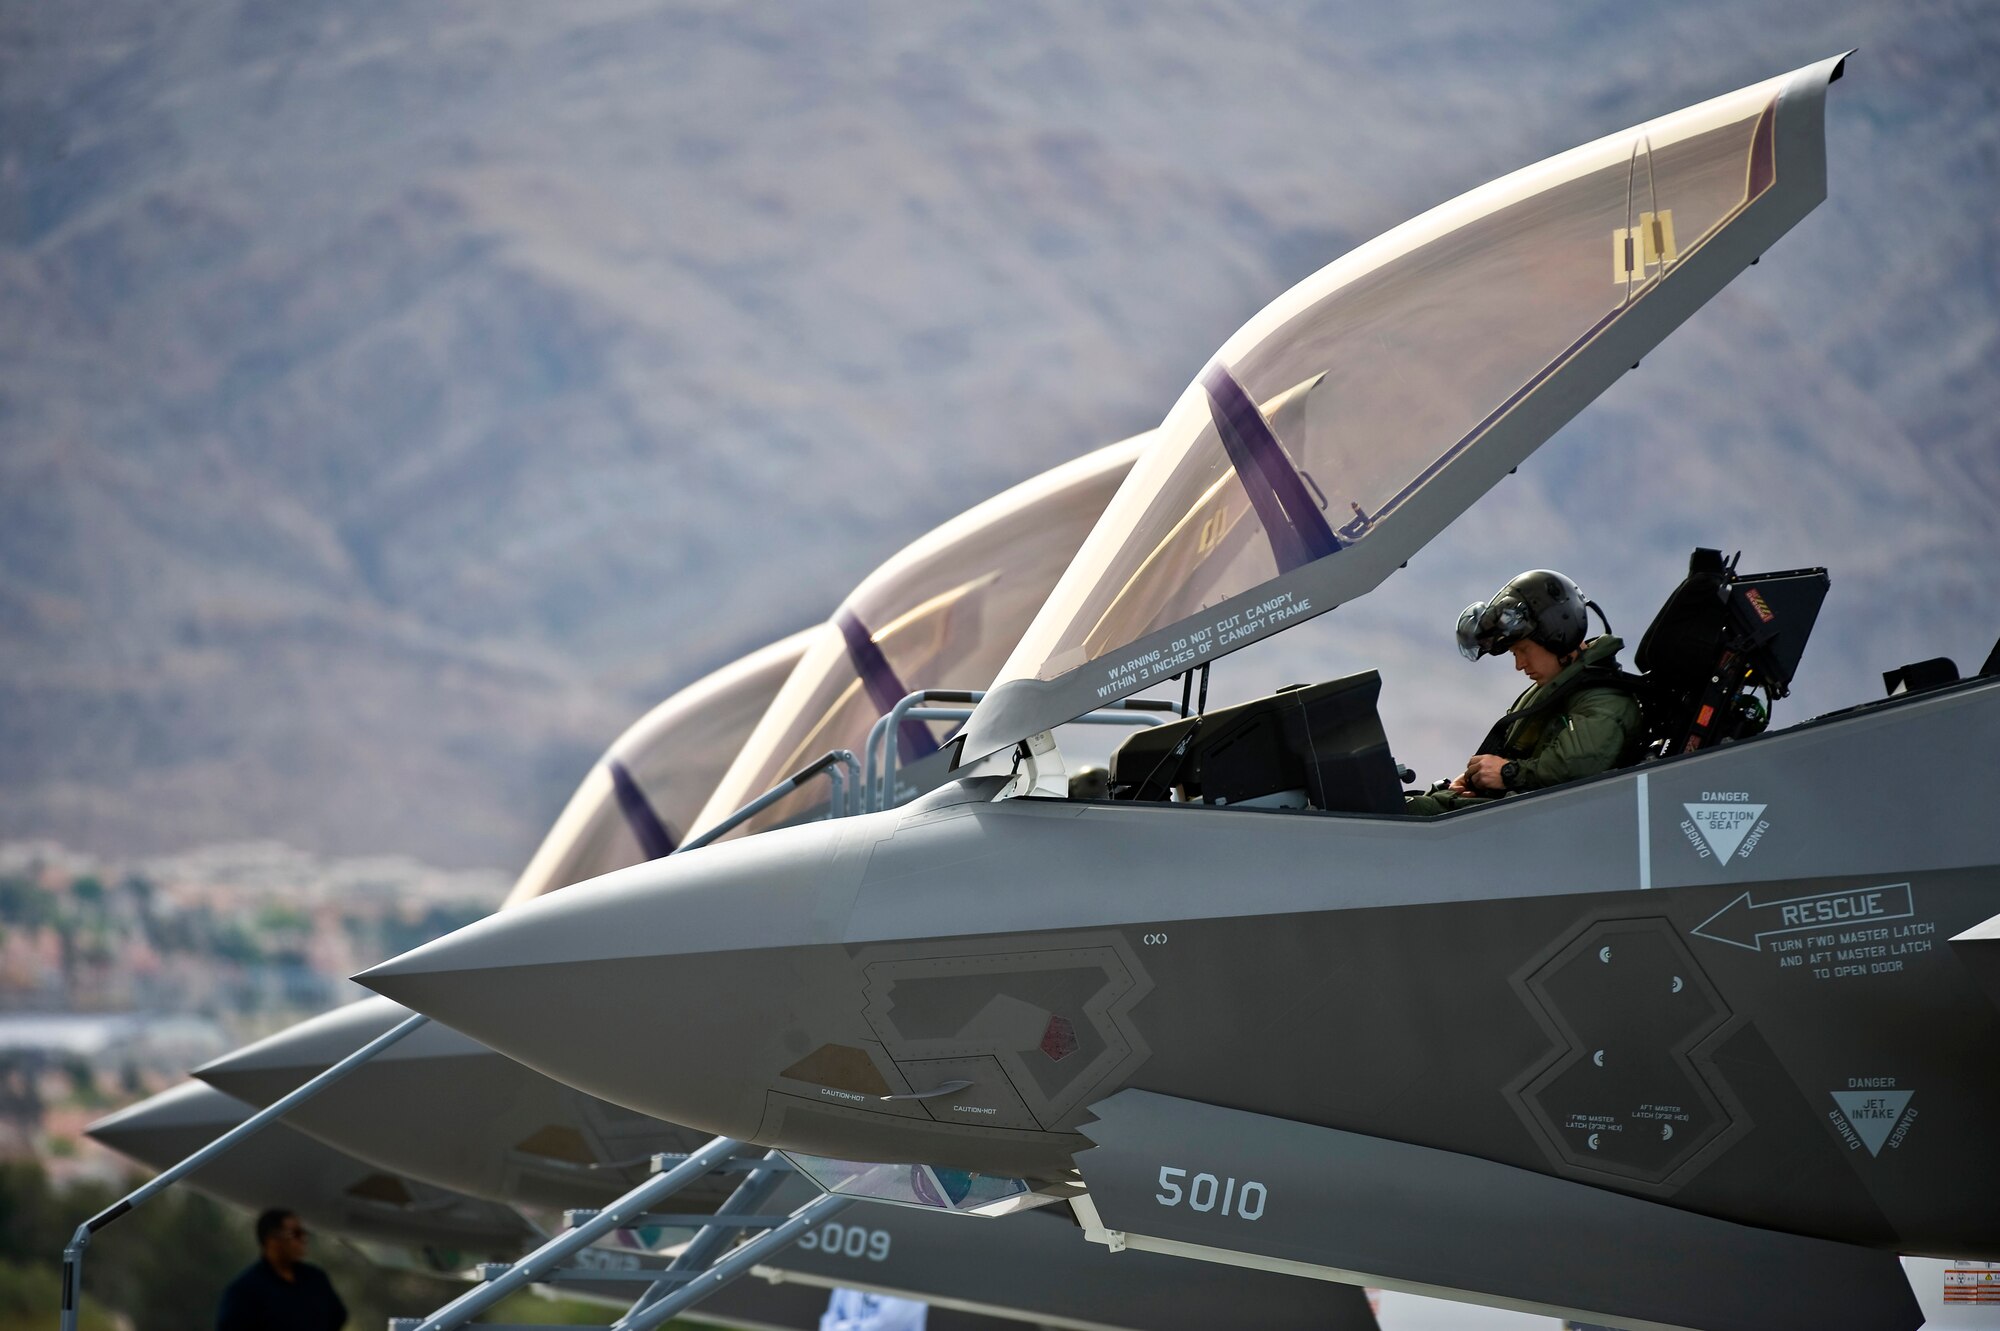 U.S. Air Force Capt. Brad Matherne, 422nd Test and Evaluation Squadron pilot, conducts pre-flight checks inside an F-35A Lightning II before a training mission April 4, 2013, at Nellis Air Force Base, Nev. The F-35A will be integrated into advanced training programs such as the USAF Weapons School, Red Flag and Green Flag exercises. (U.S. Air Force photo/Senior Airman Brett Clashman)